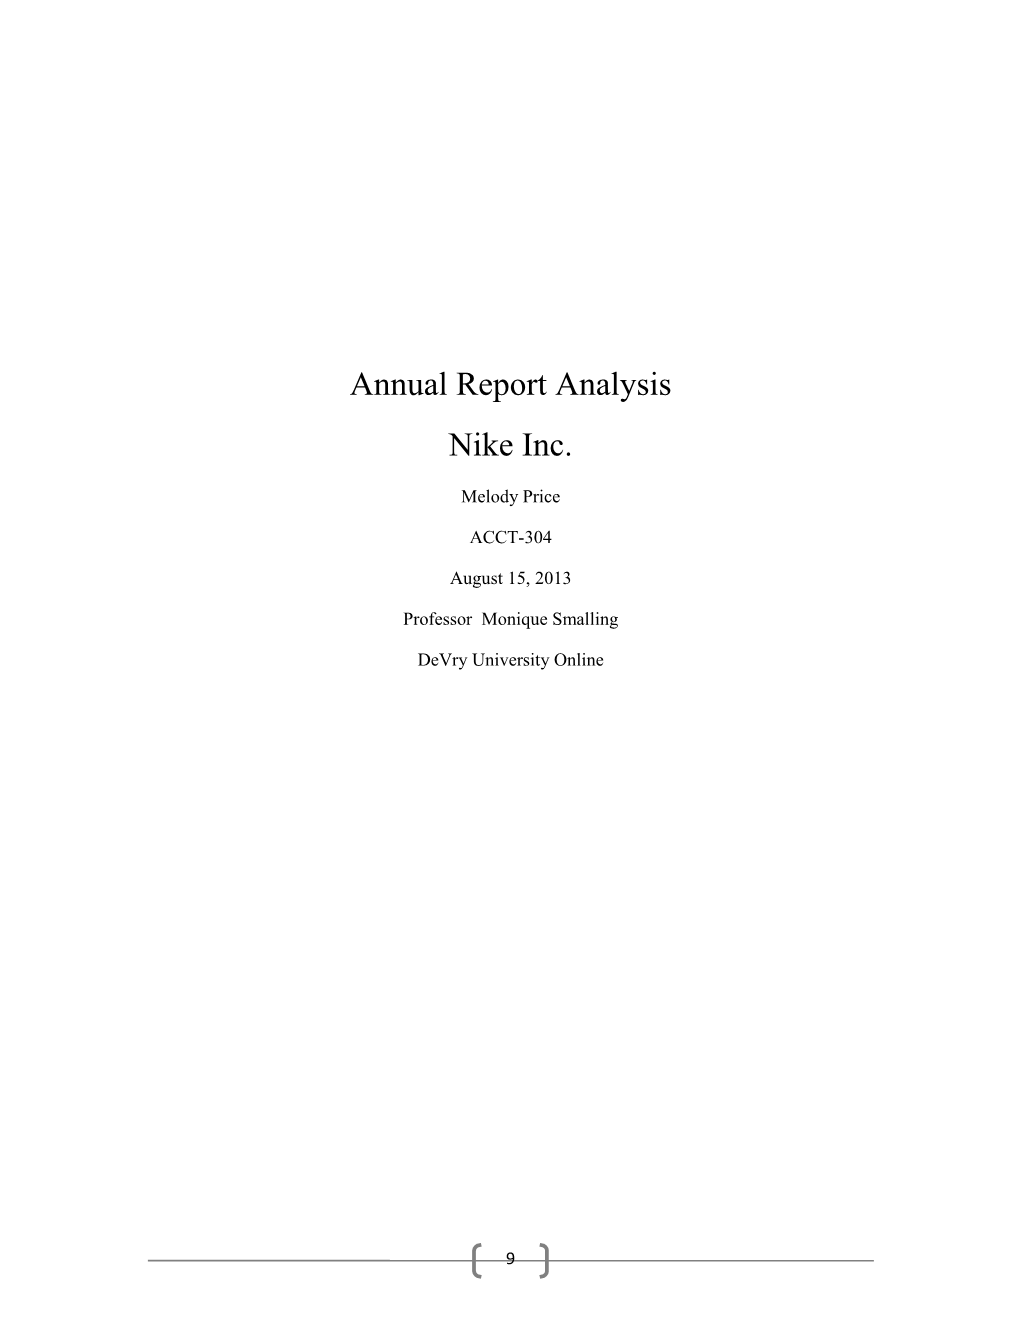 Annual Report Analysis